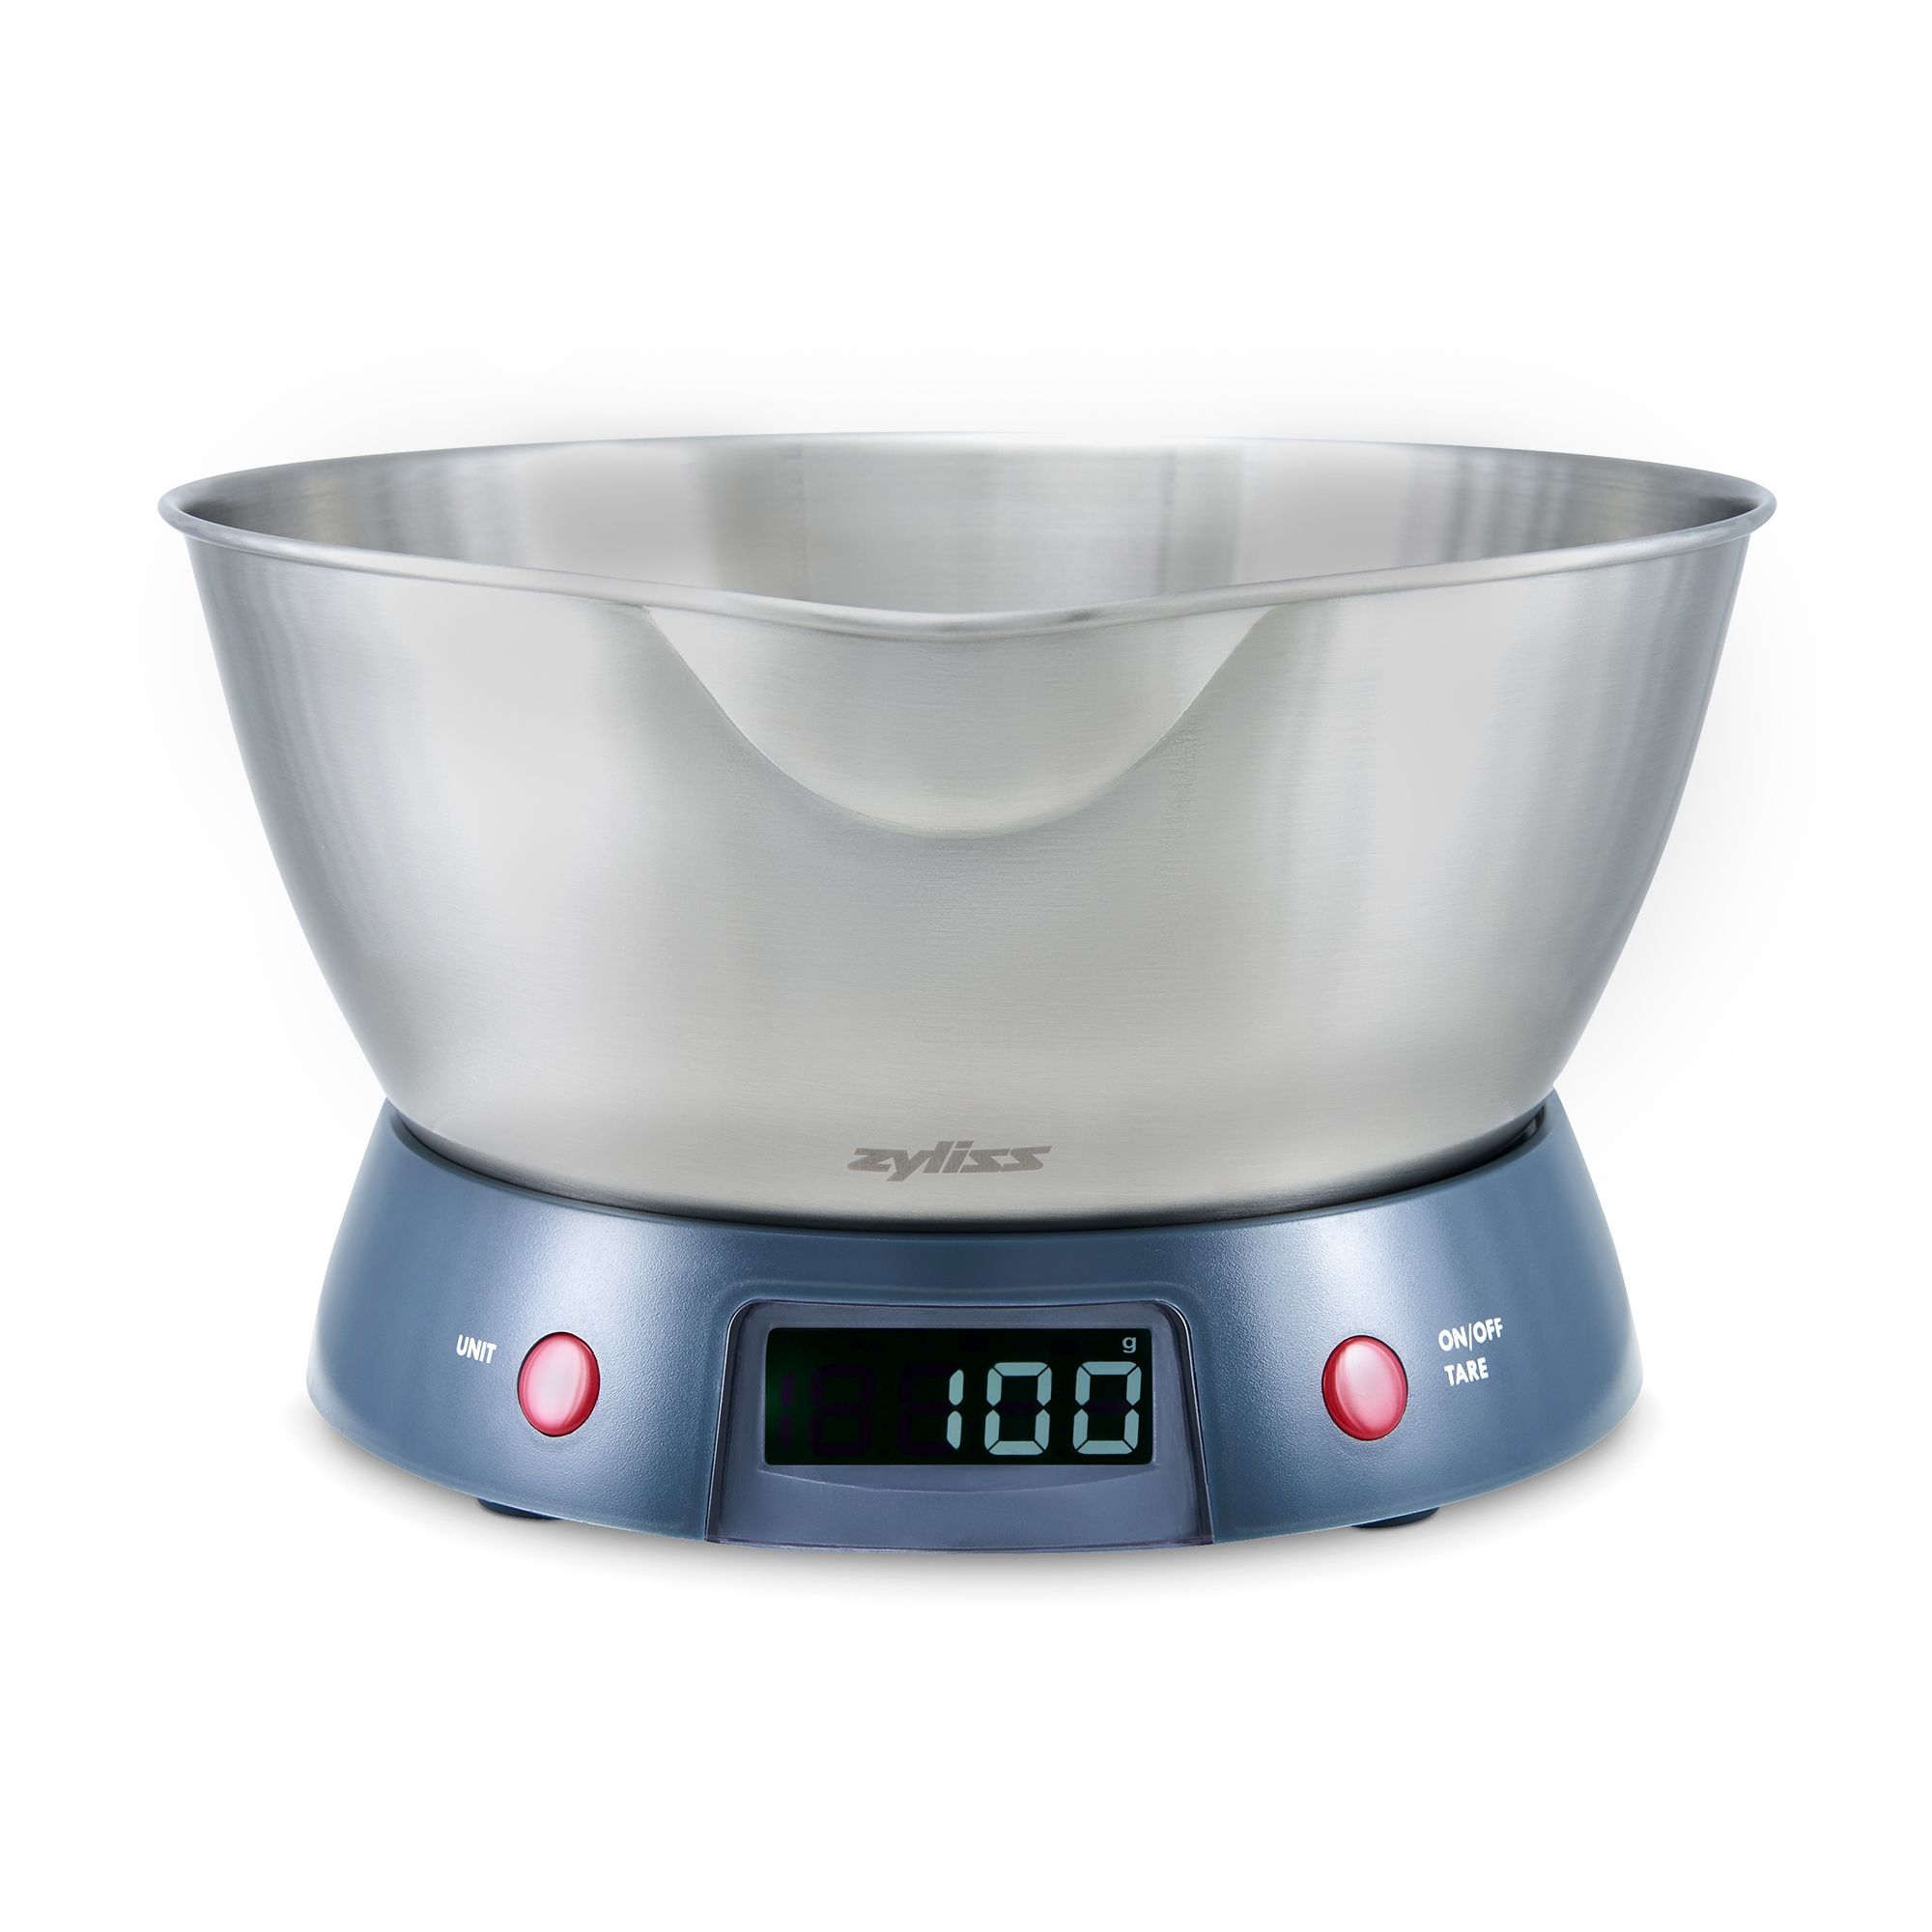 Zyliss - Digital kitchen scales incl. stainless steel bowl